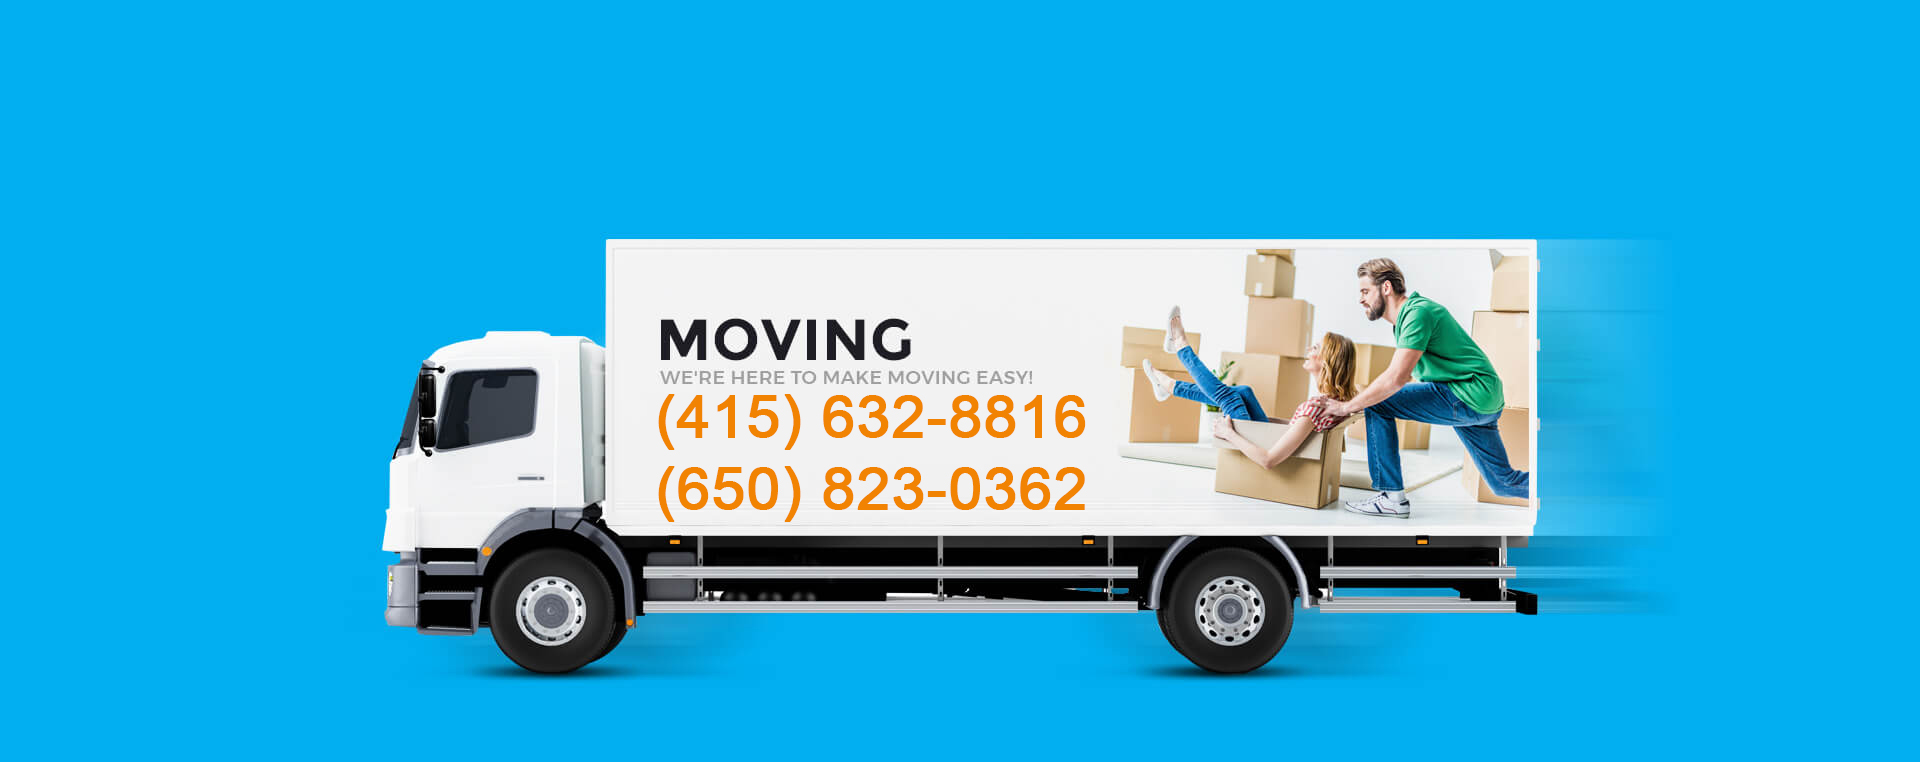 all star moving service